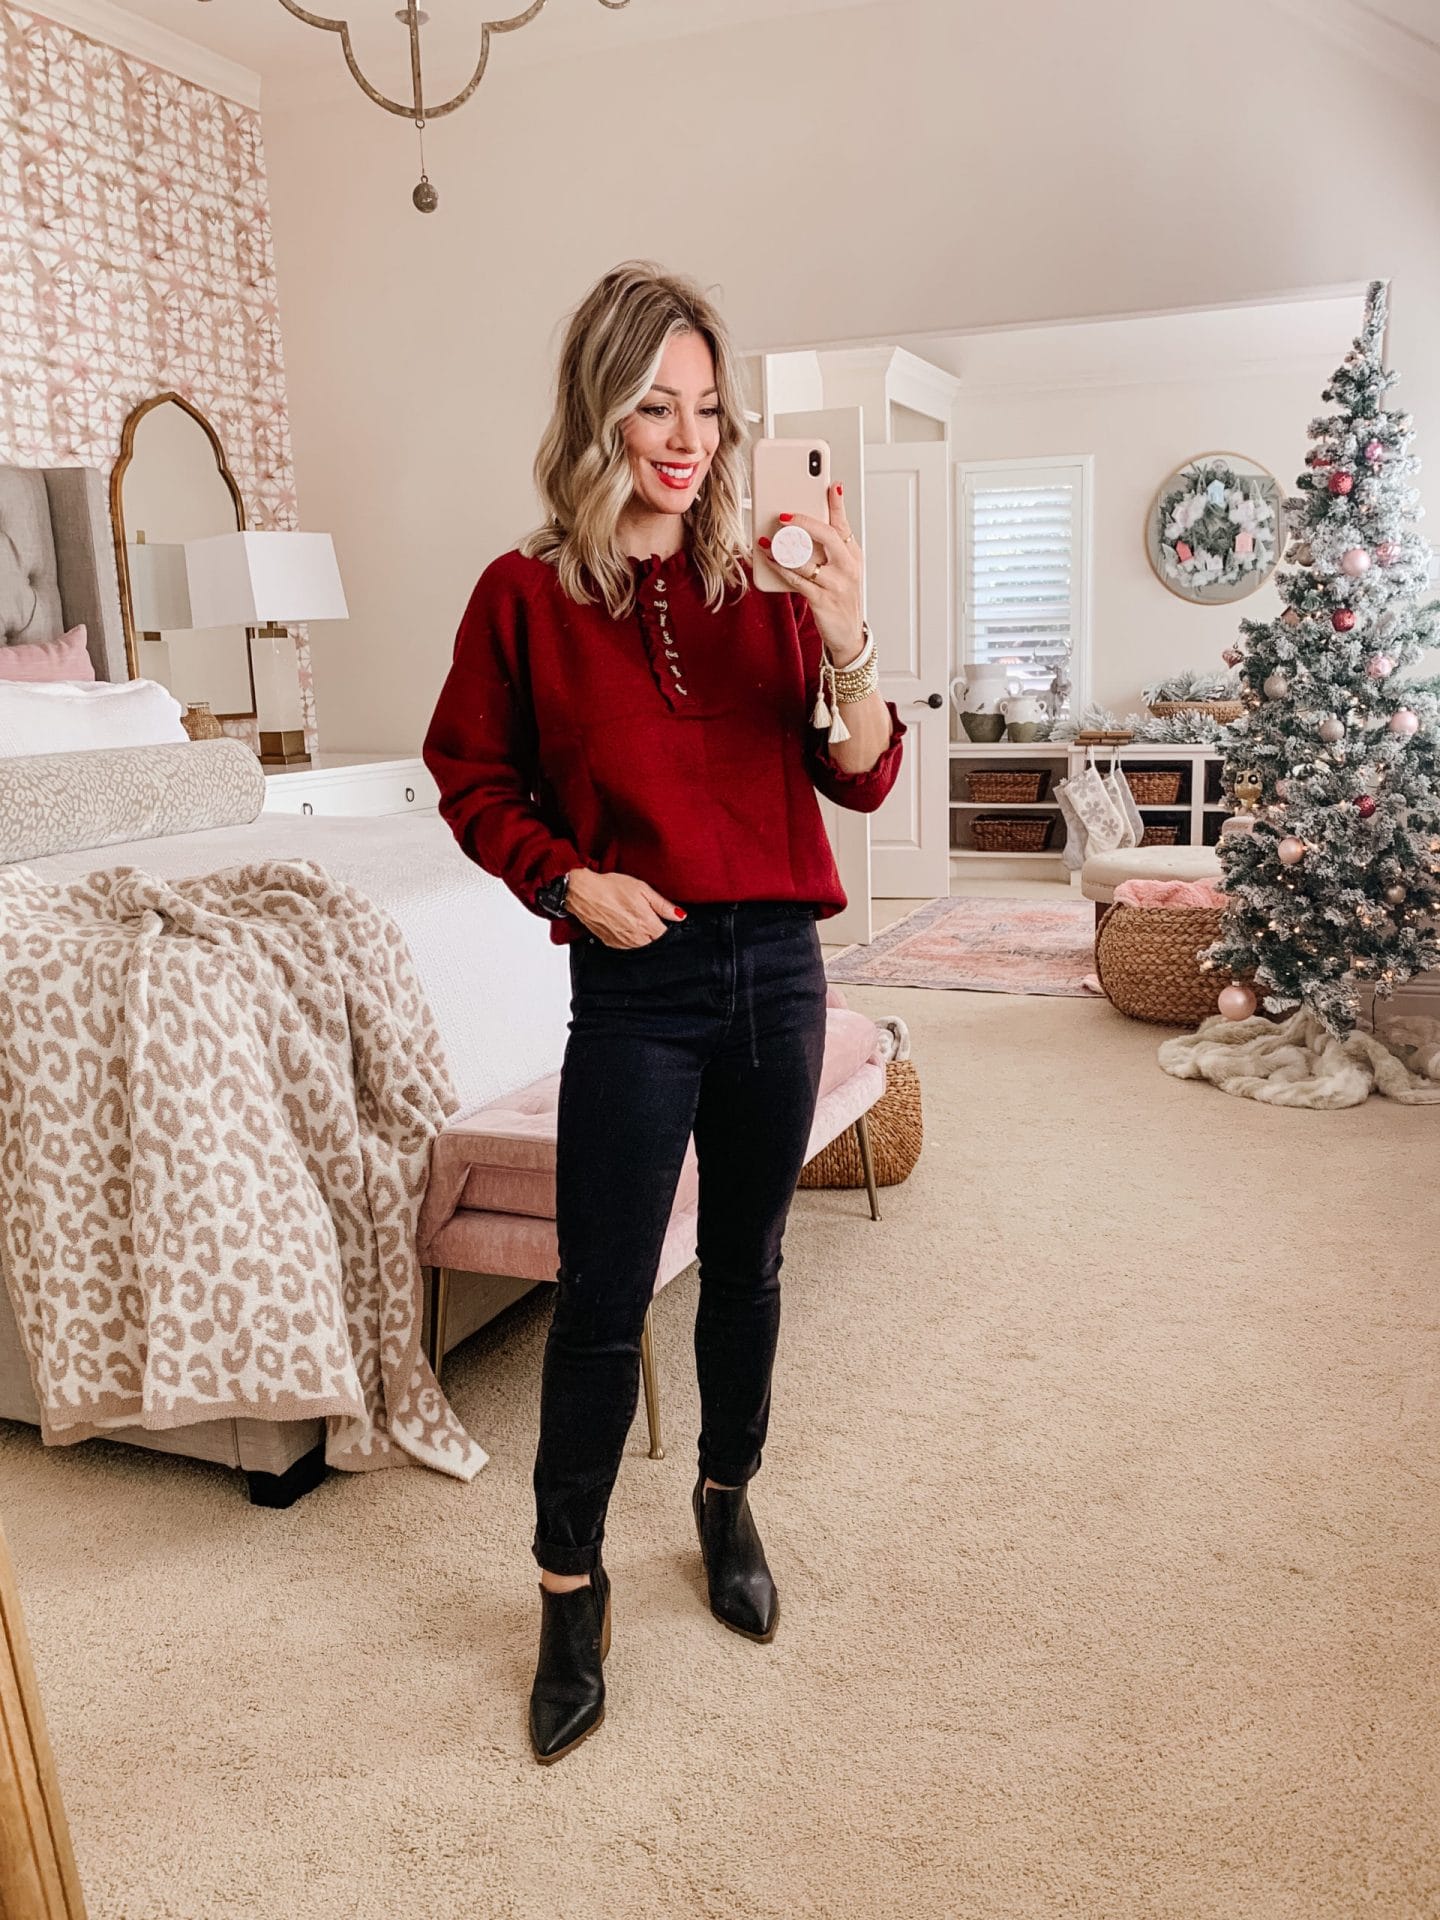 Amazon Fashion, Sweater, Jeans, Booties 